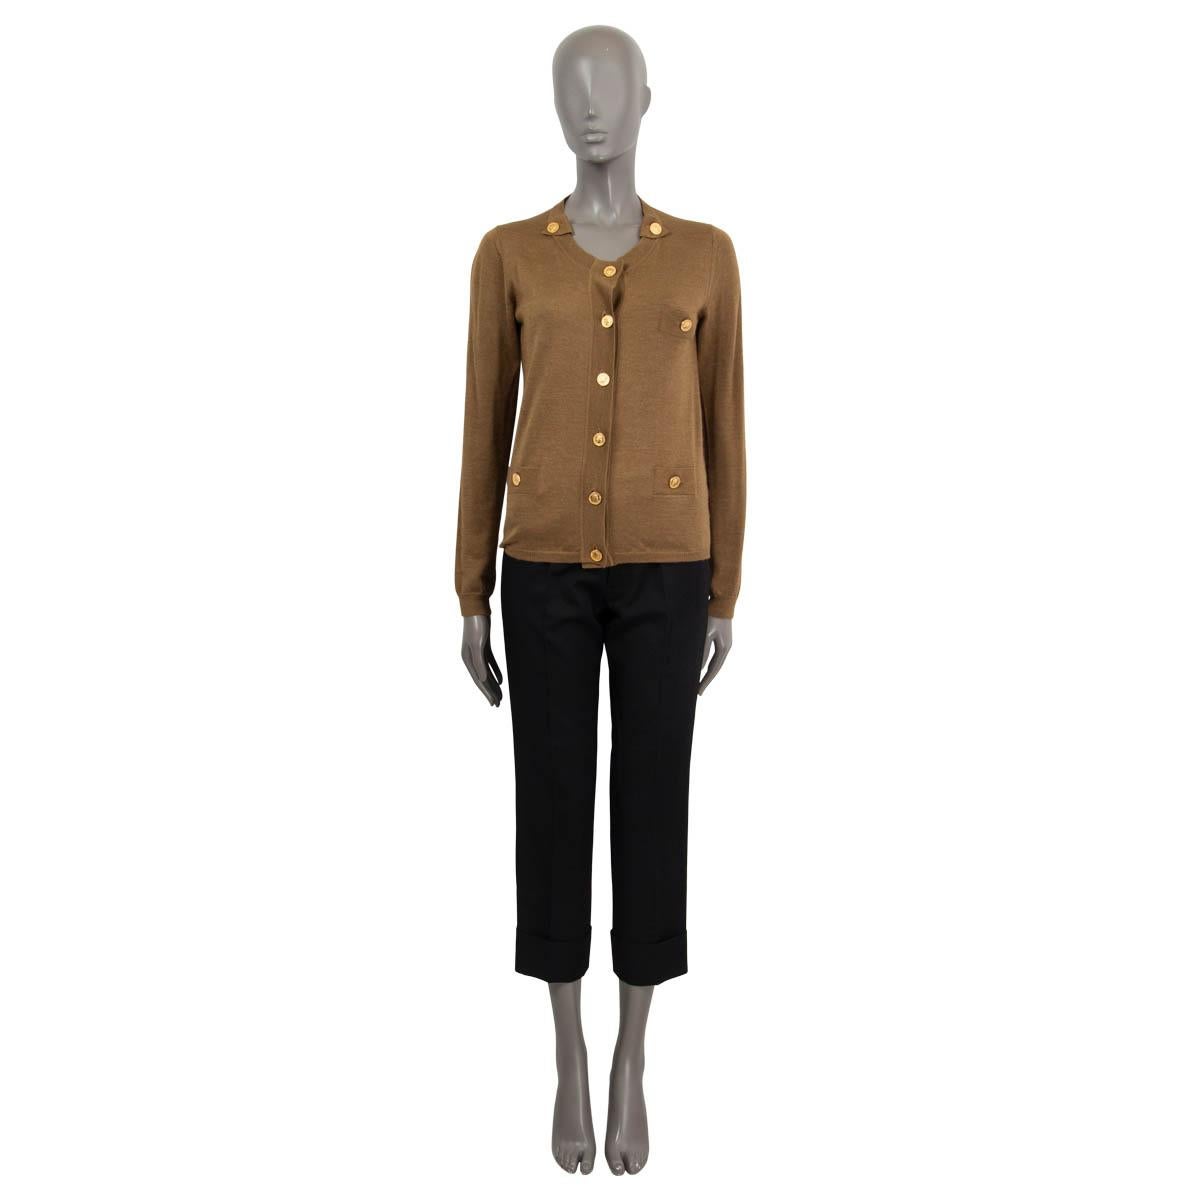 100% authentic Chloé knit cardigan in bronze cashmere (70%) and silk (30%) with four patch pockets. Opends with gold tone buttons on the front. Unlined. Has been worn and is in excellent condition.

Measurements
Tag Size	S
Size	S
Shoulder Width	36cm